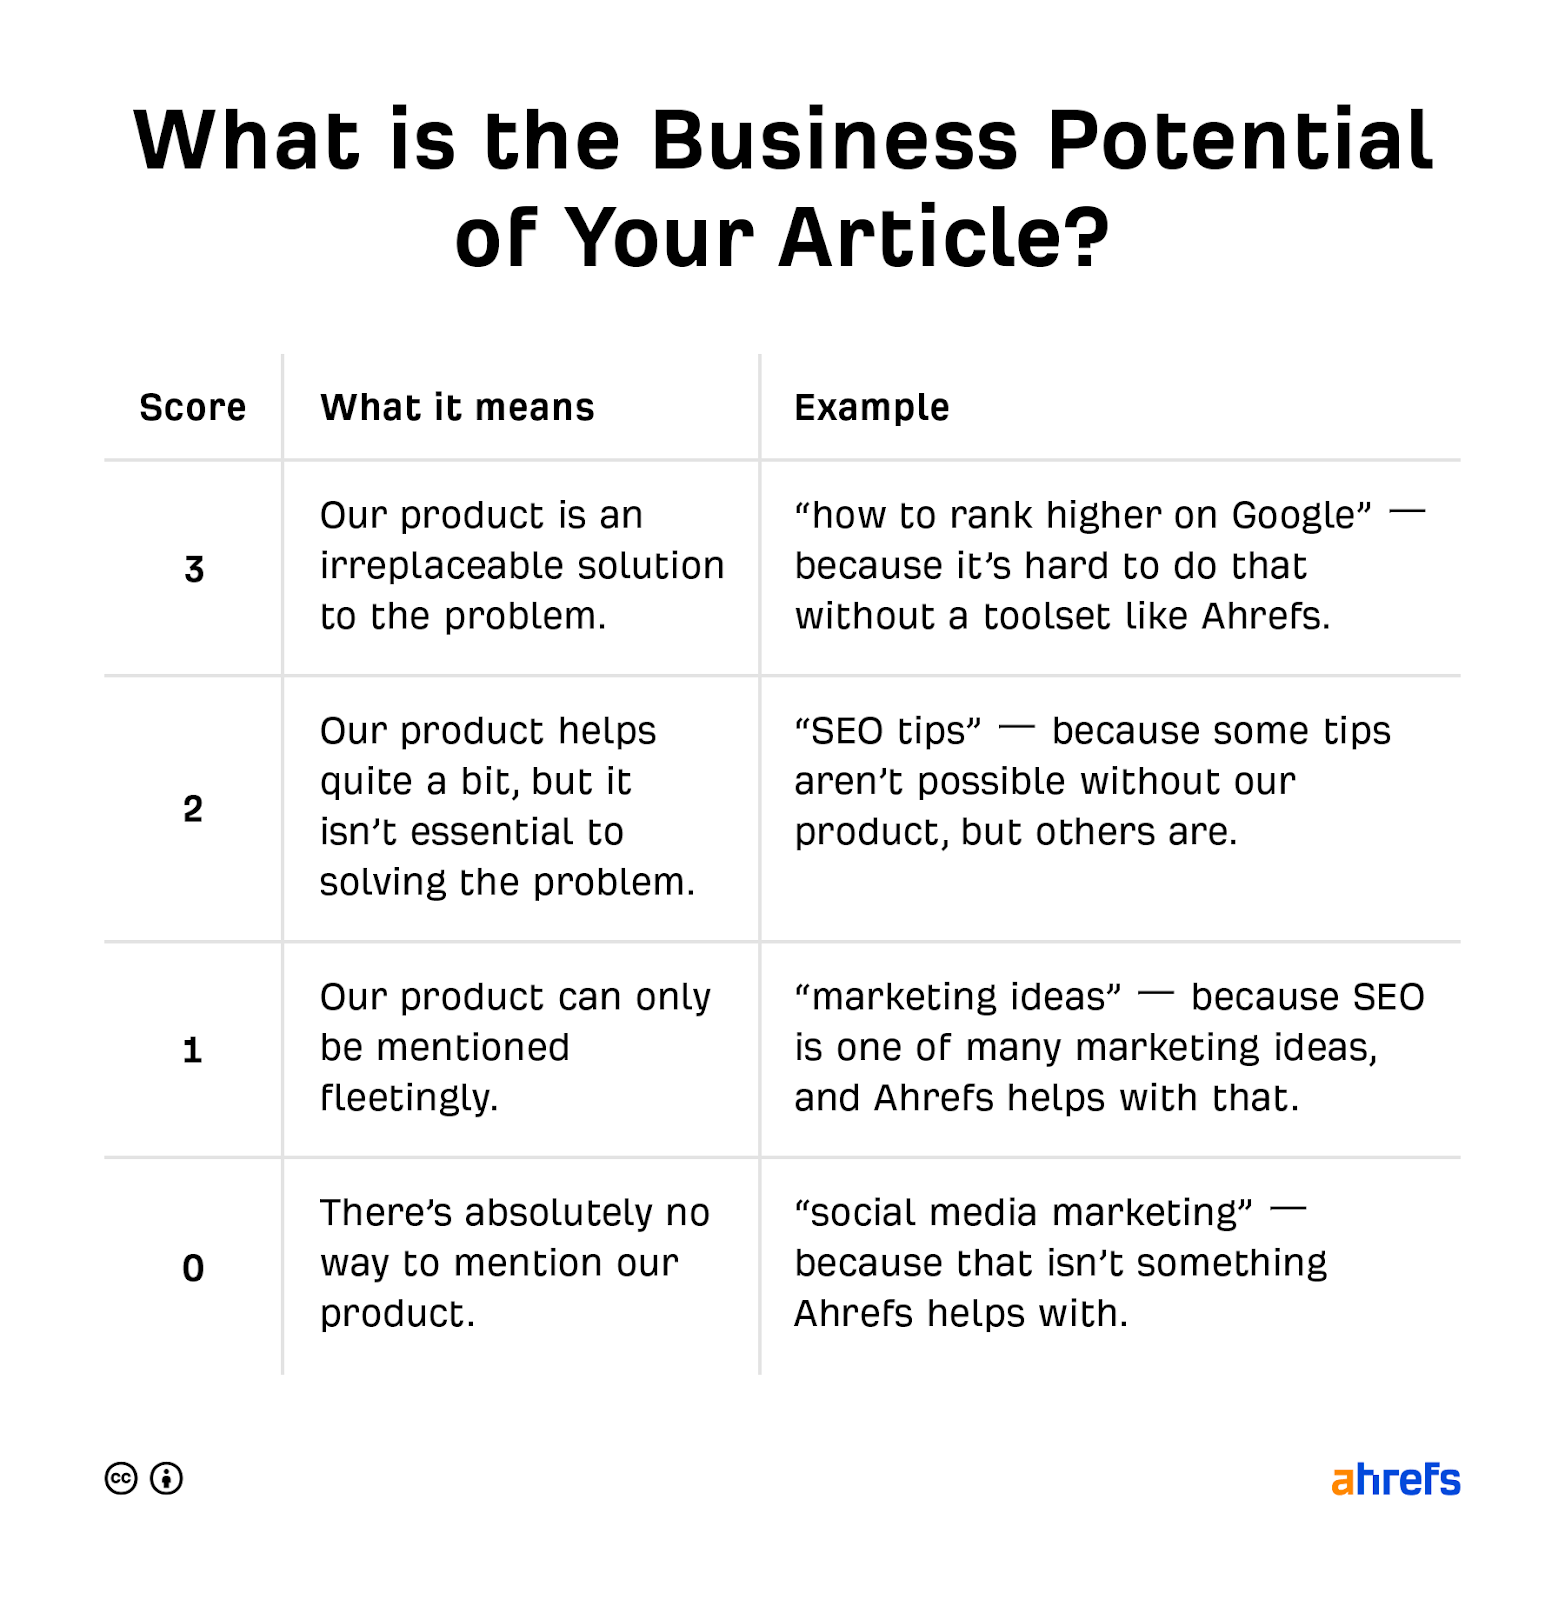 Assessing business potential of an article